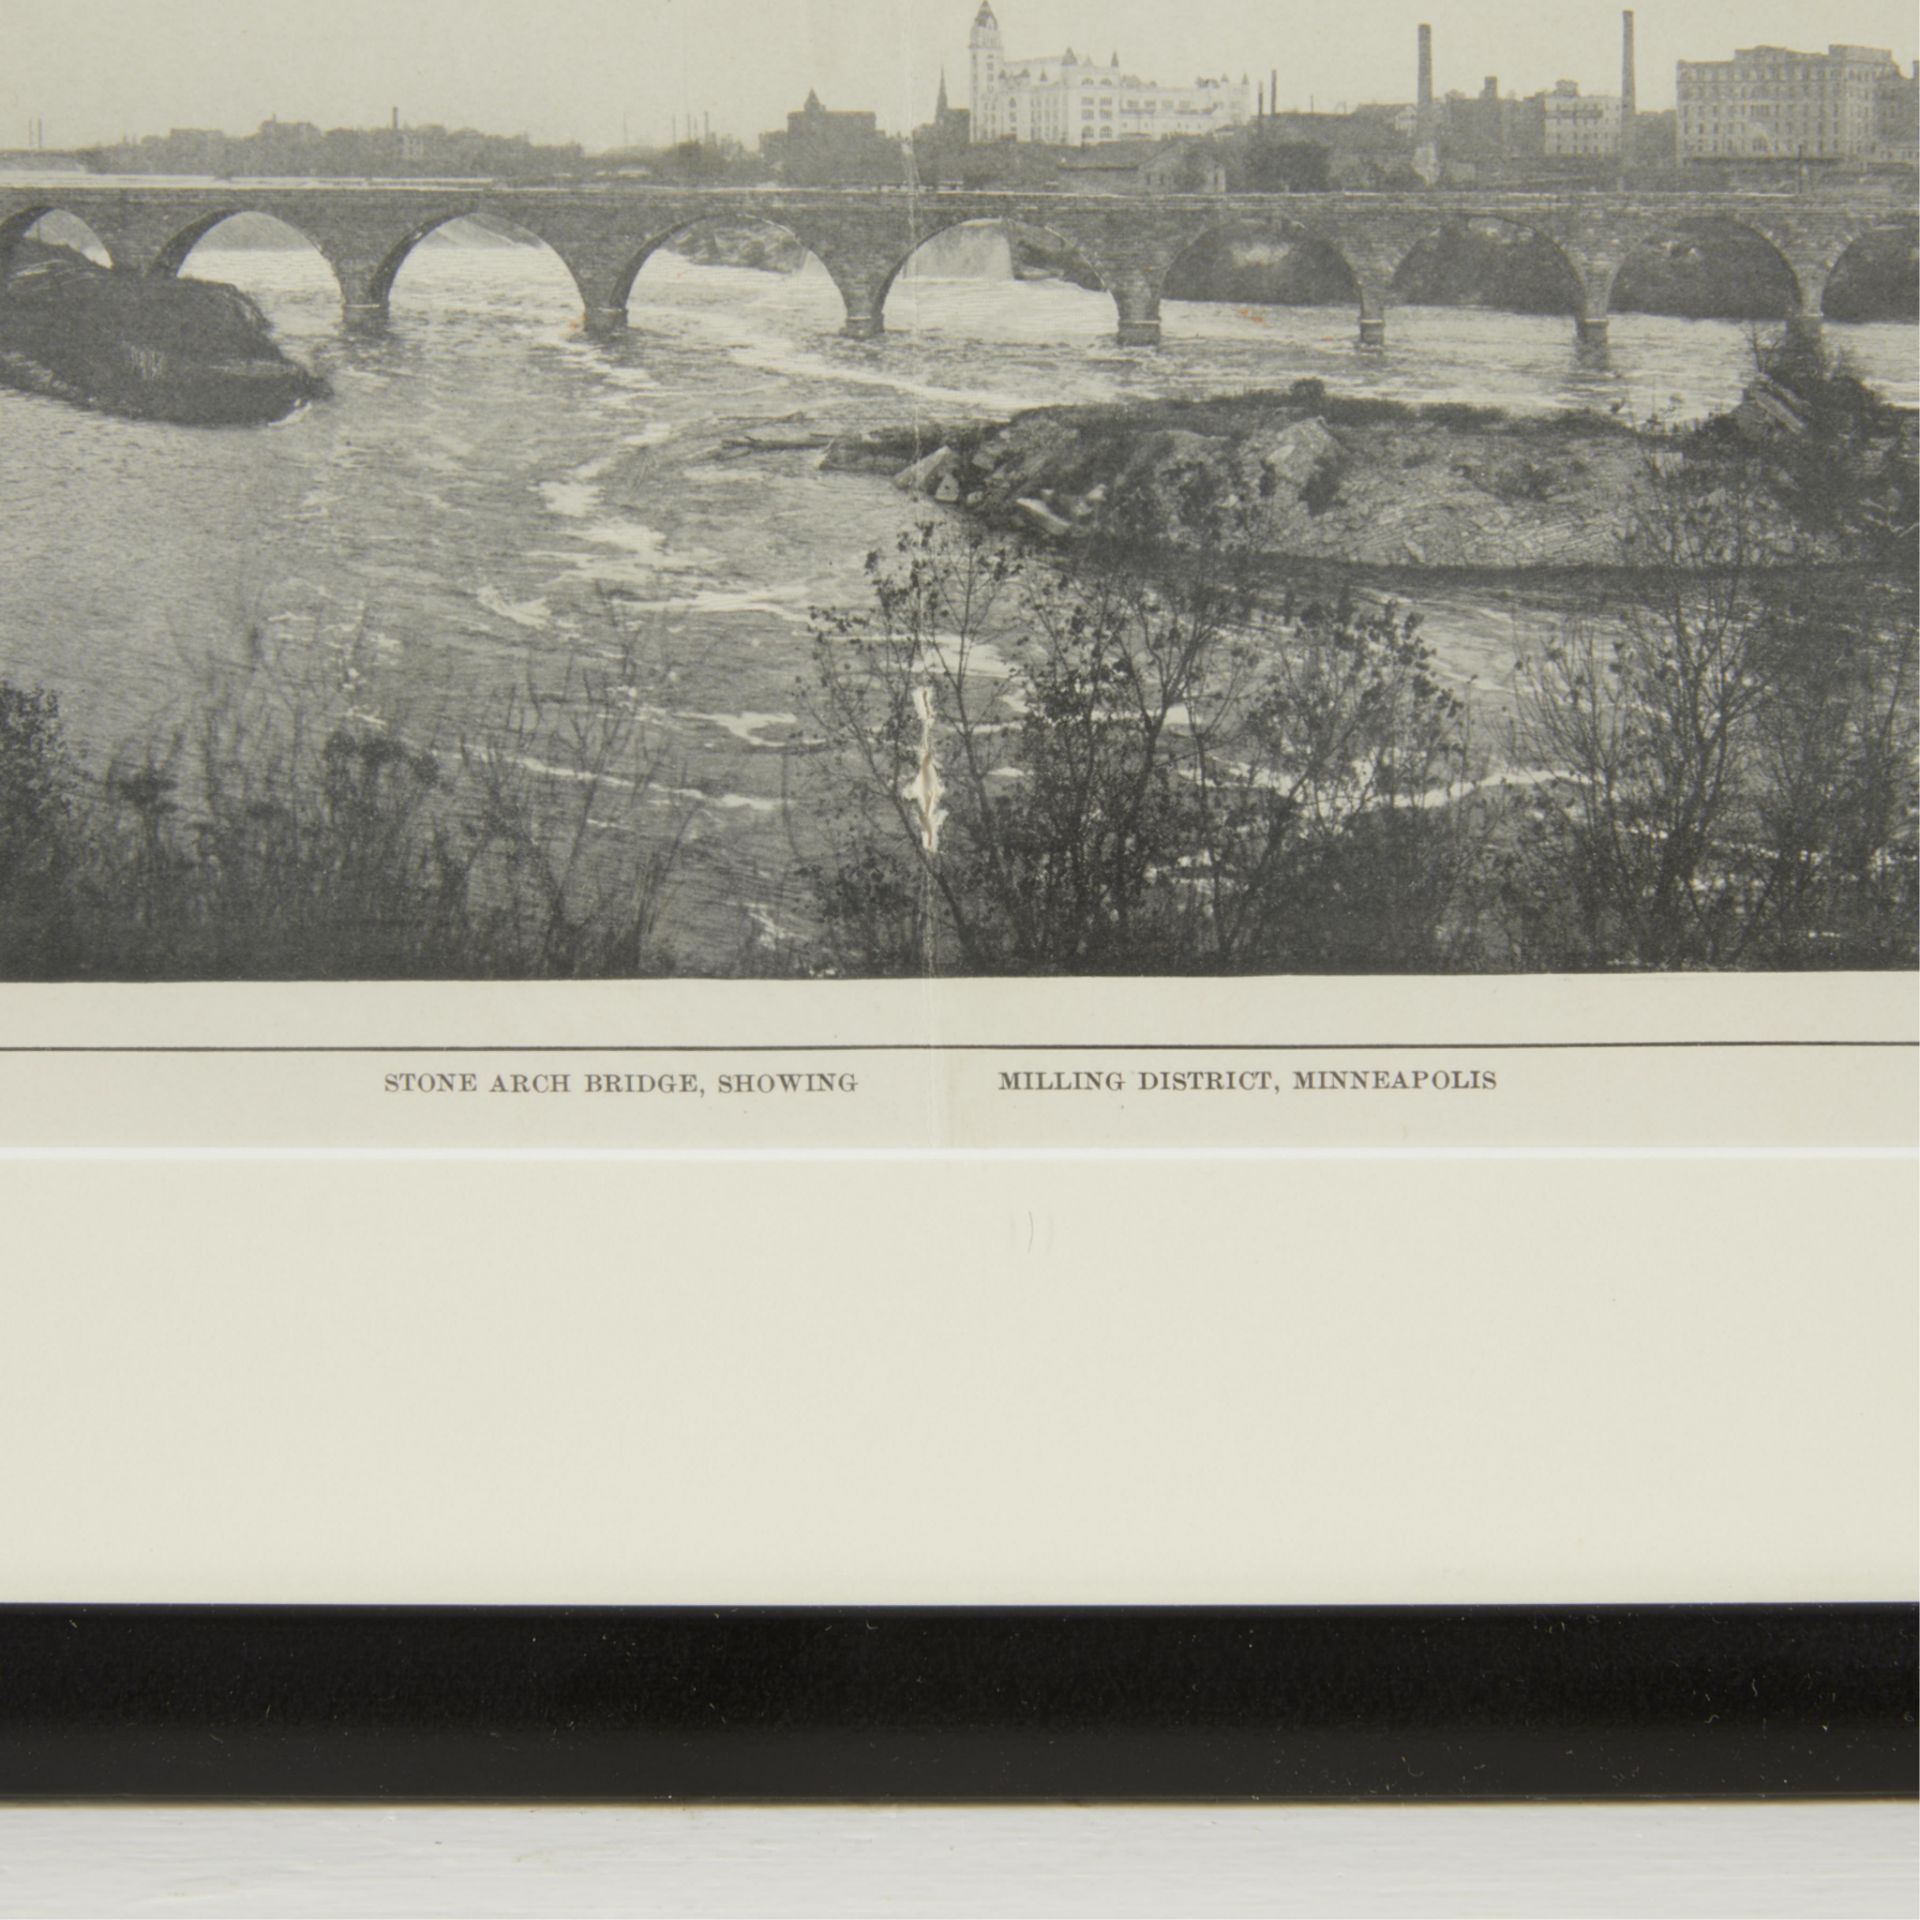 Photo of Stone Arch Bridge & Milling District MN - Image 2 of 6